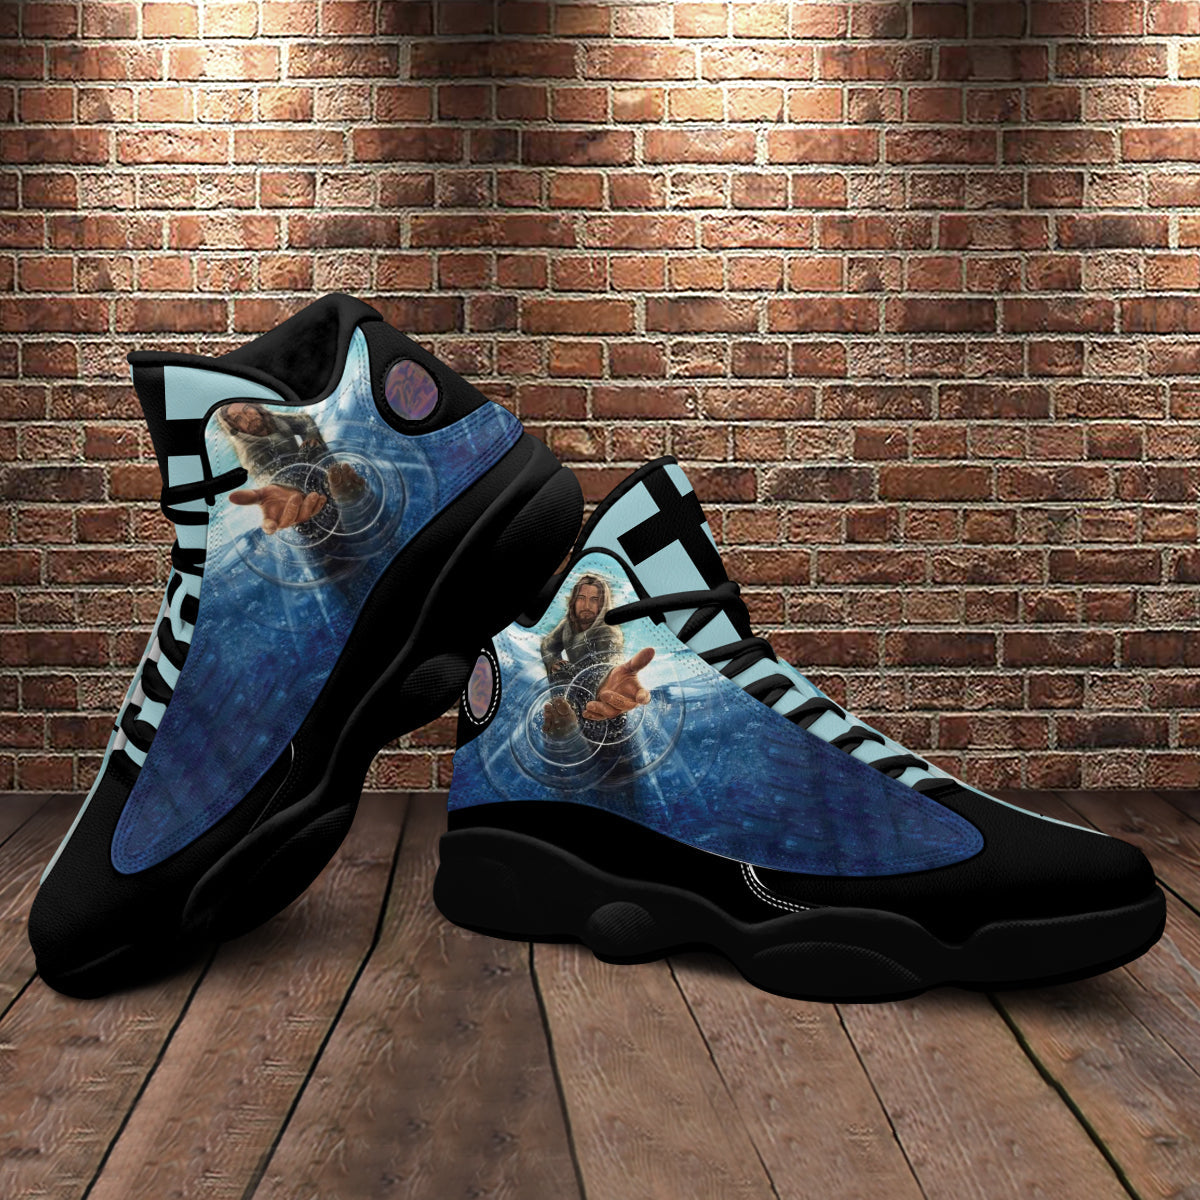 Jesus Takes My Hands Under Water Basketball Shoes For Men Women - Christian Shoes - Jesus Shoes - Unisex Basketball Shoes